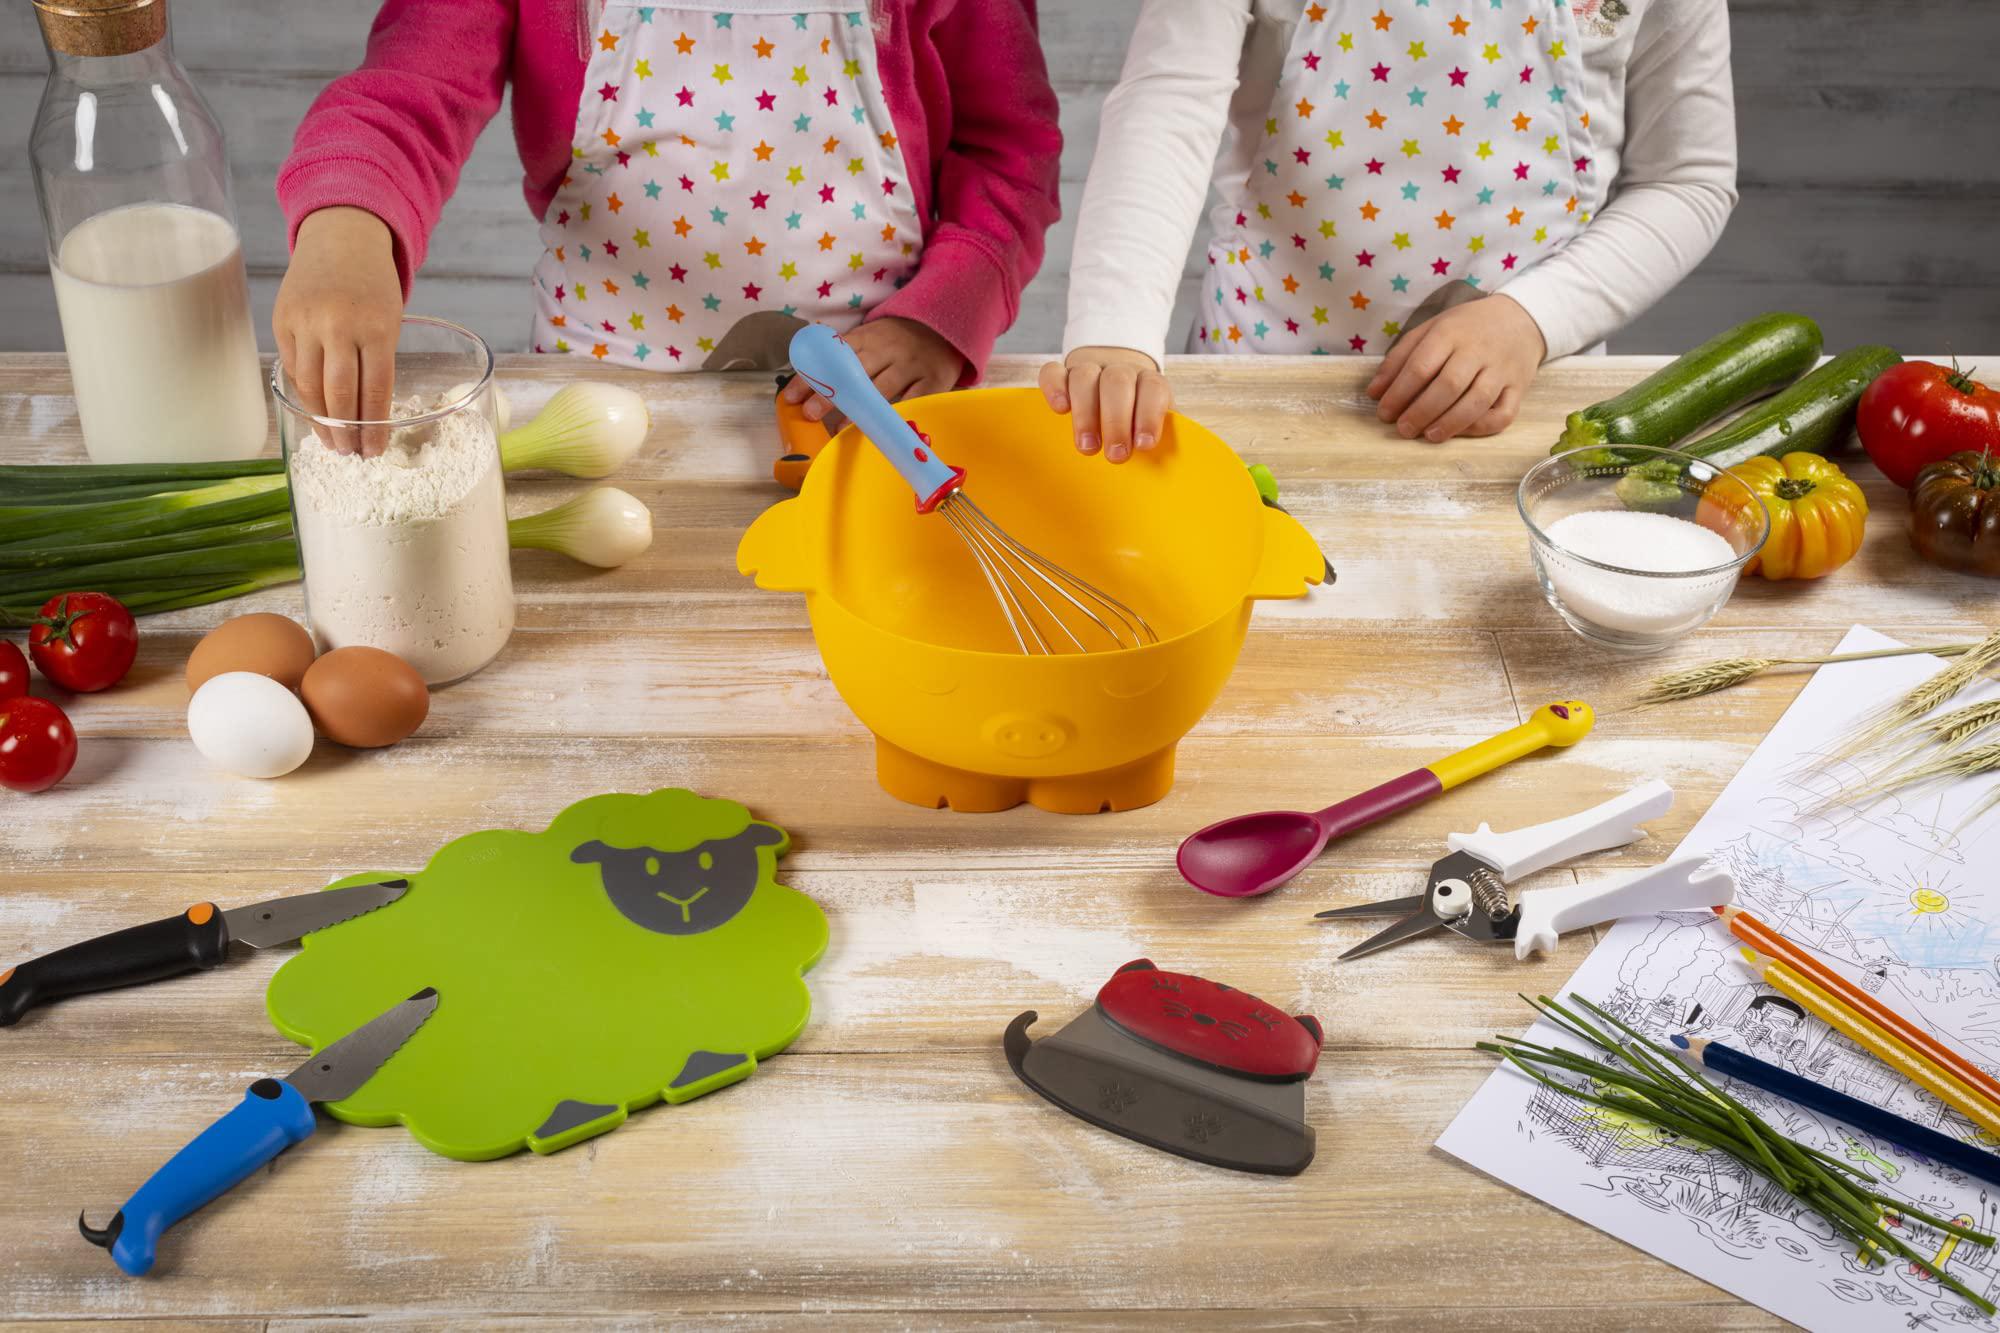 kuhn rikon kinderkitchen kids cutting board, sheep, 9.8" x 9.1" x 4.3", green | child-friendly kitchen tools for real cooking